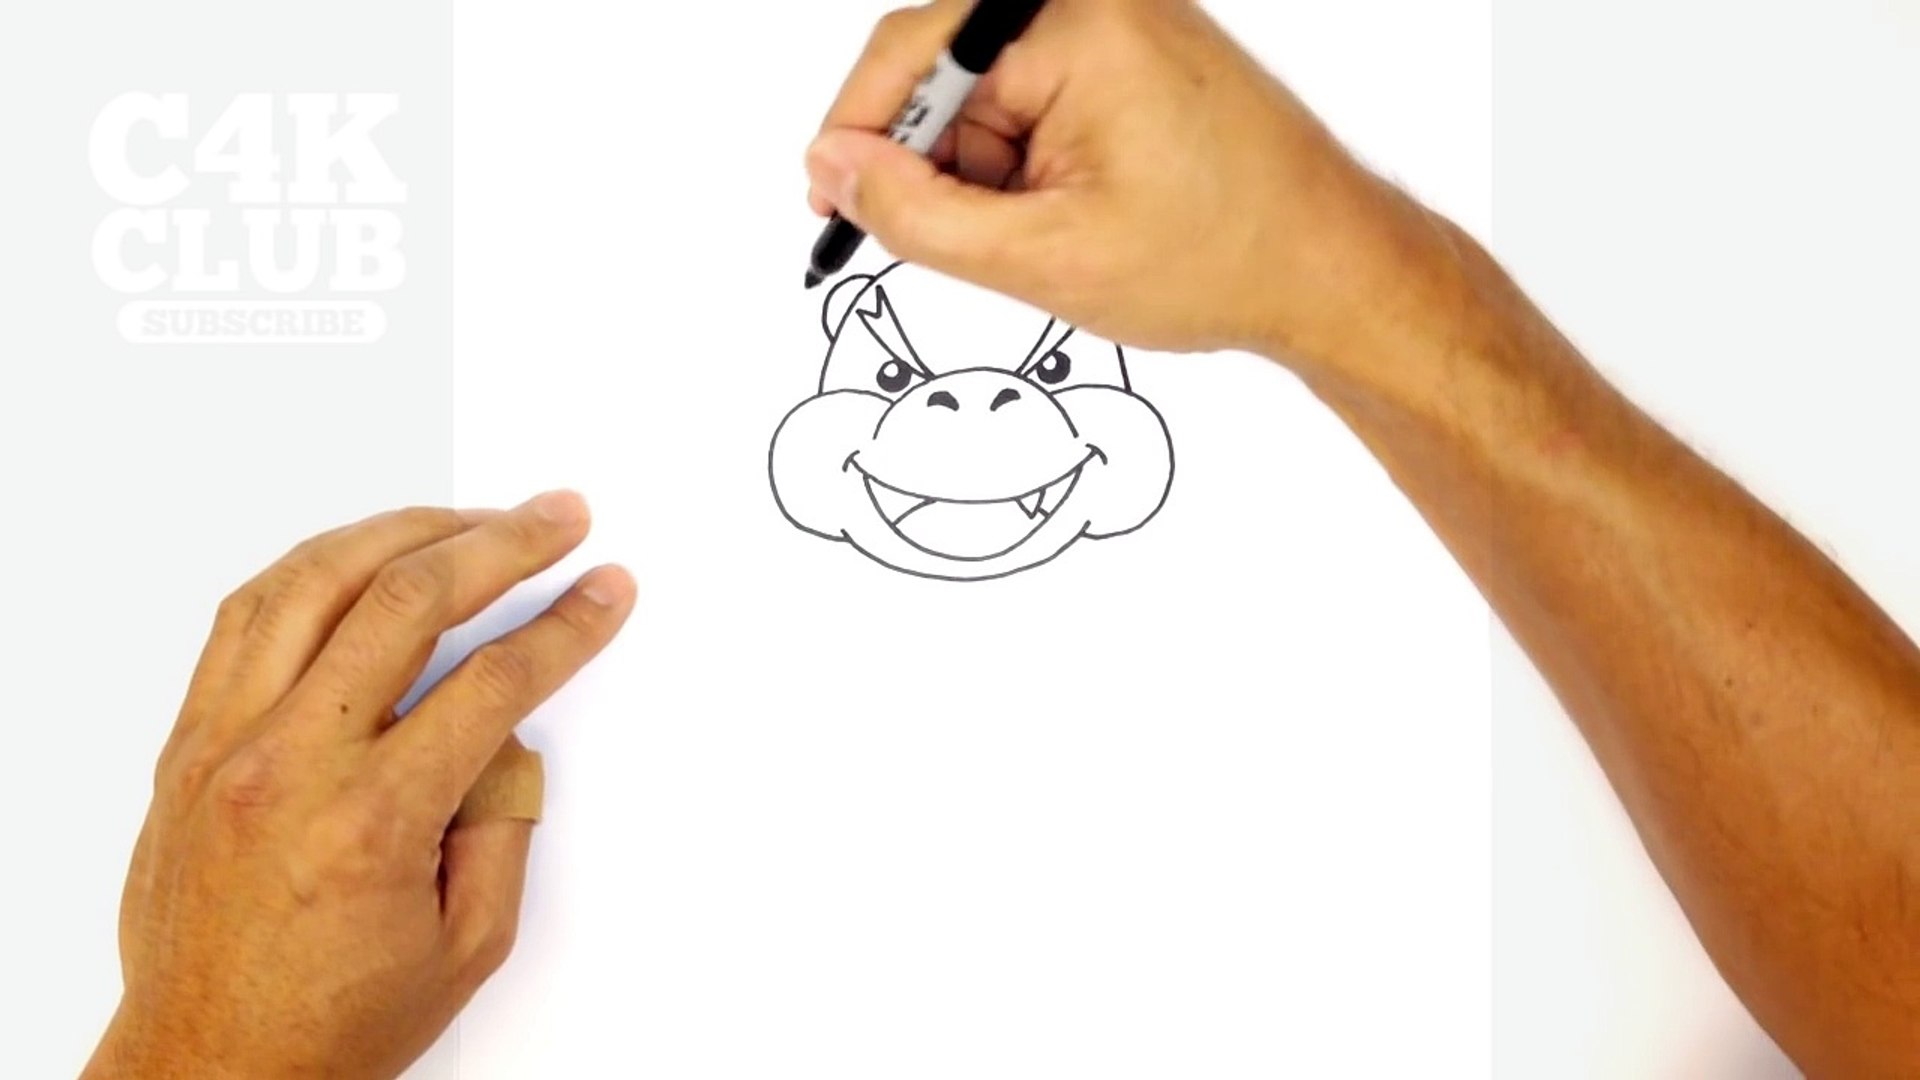 how to draw bowser jr face